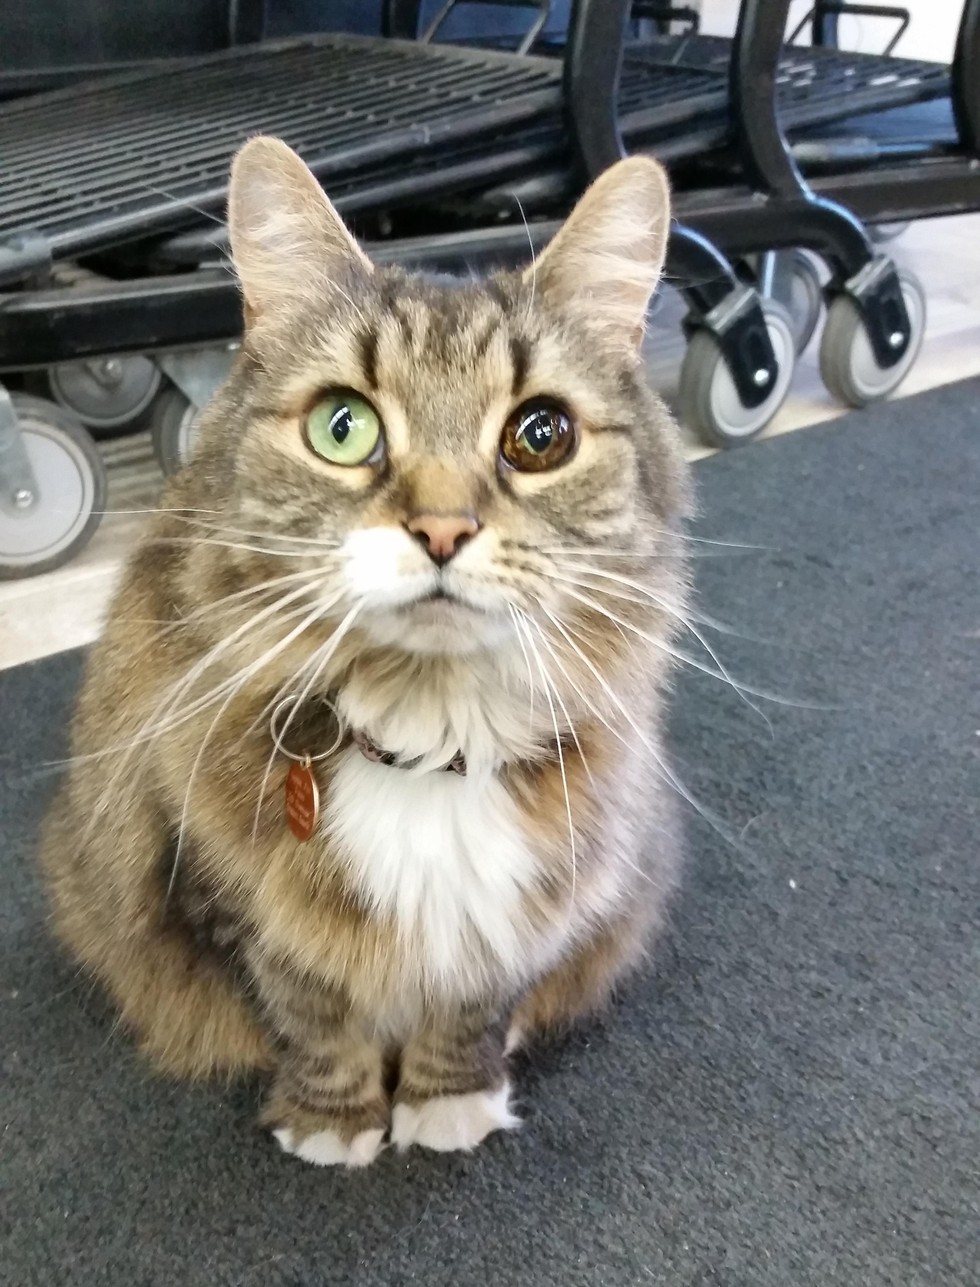 Woman Saves Stray Cat with Unique Eye, the Kitty Returns ...